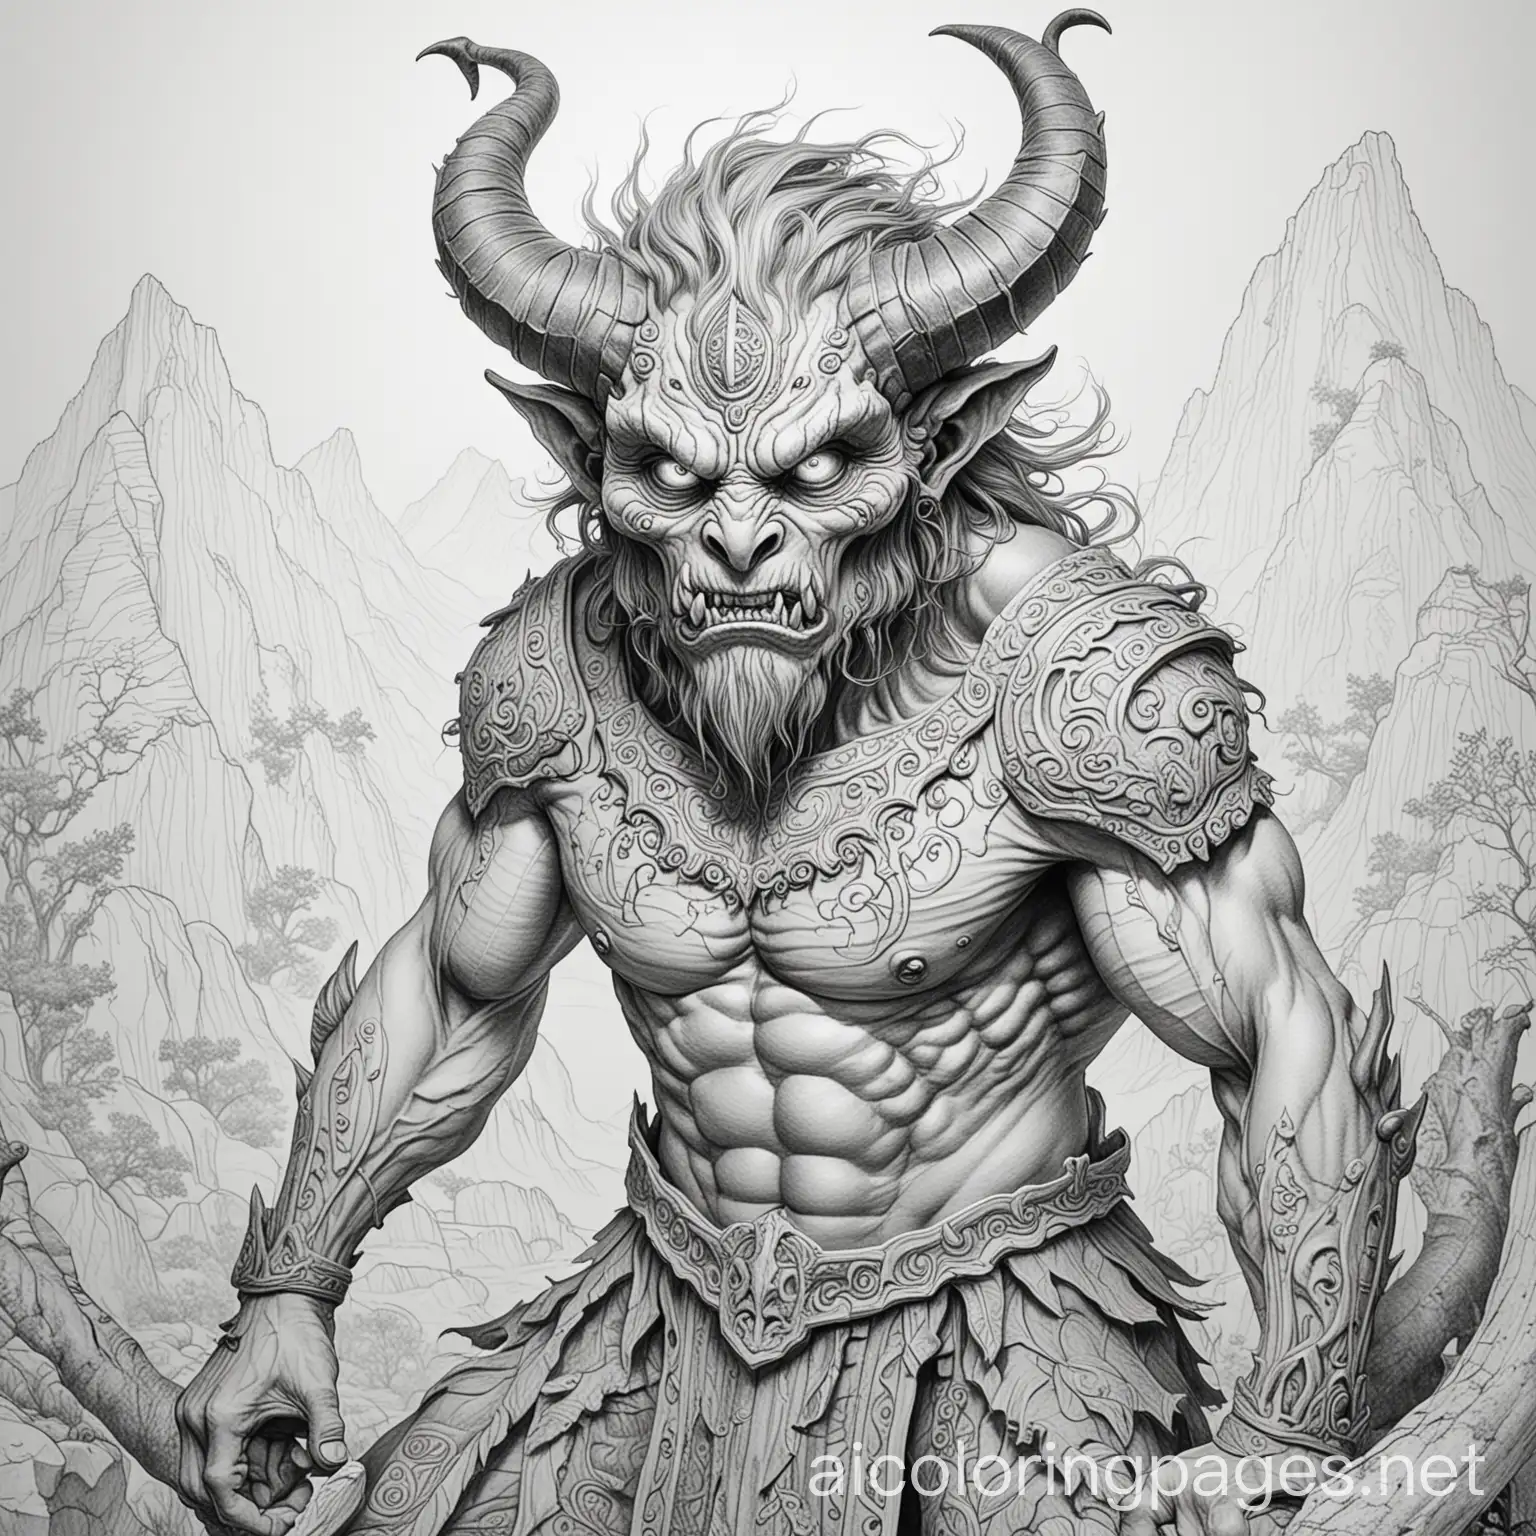 ancient demon, black and white, difficult, ample white , Coloring Page, black and white, line art, white background, Simplicity, Ample White Space. The background of the coloring page is plain white to make it easy for young children to color within the lines. The outlines of all the subjects are easy to distinguish, making it simple for kids to color without too much difficulty